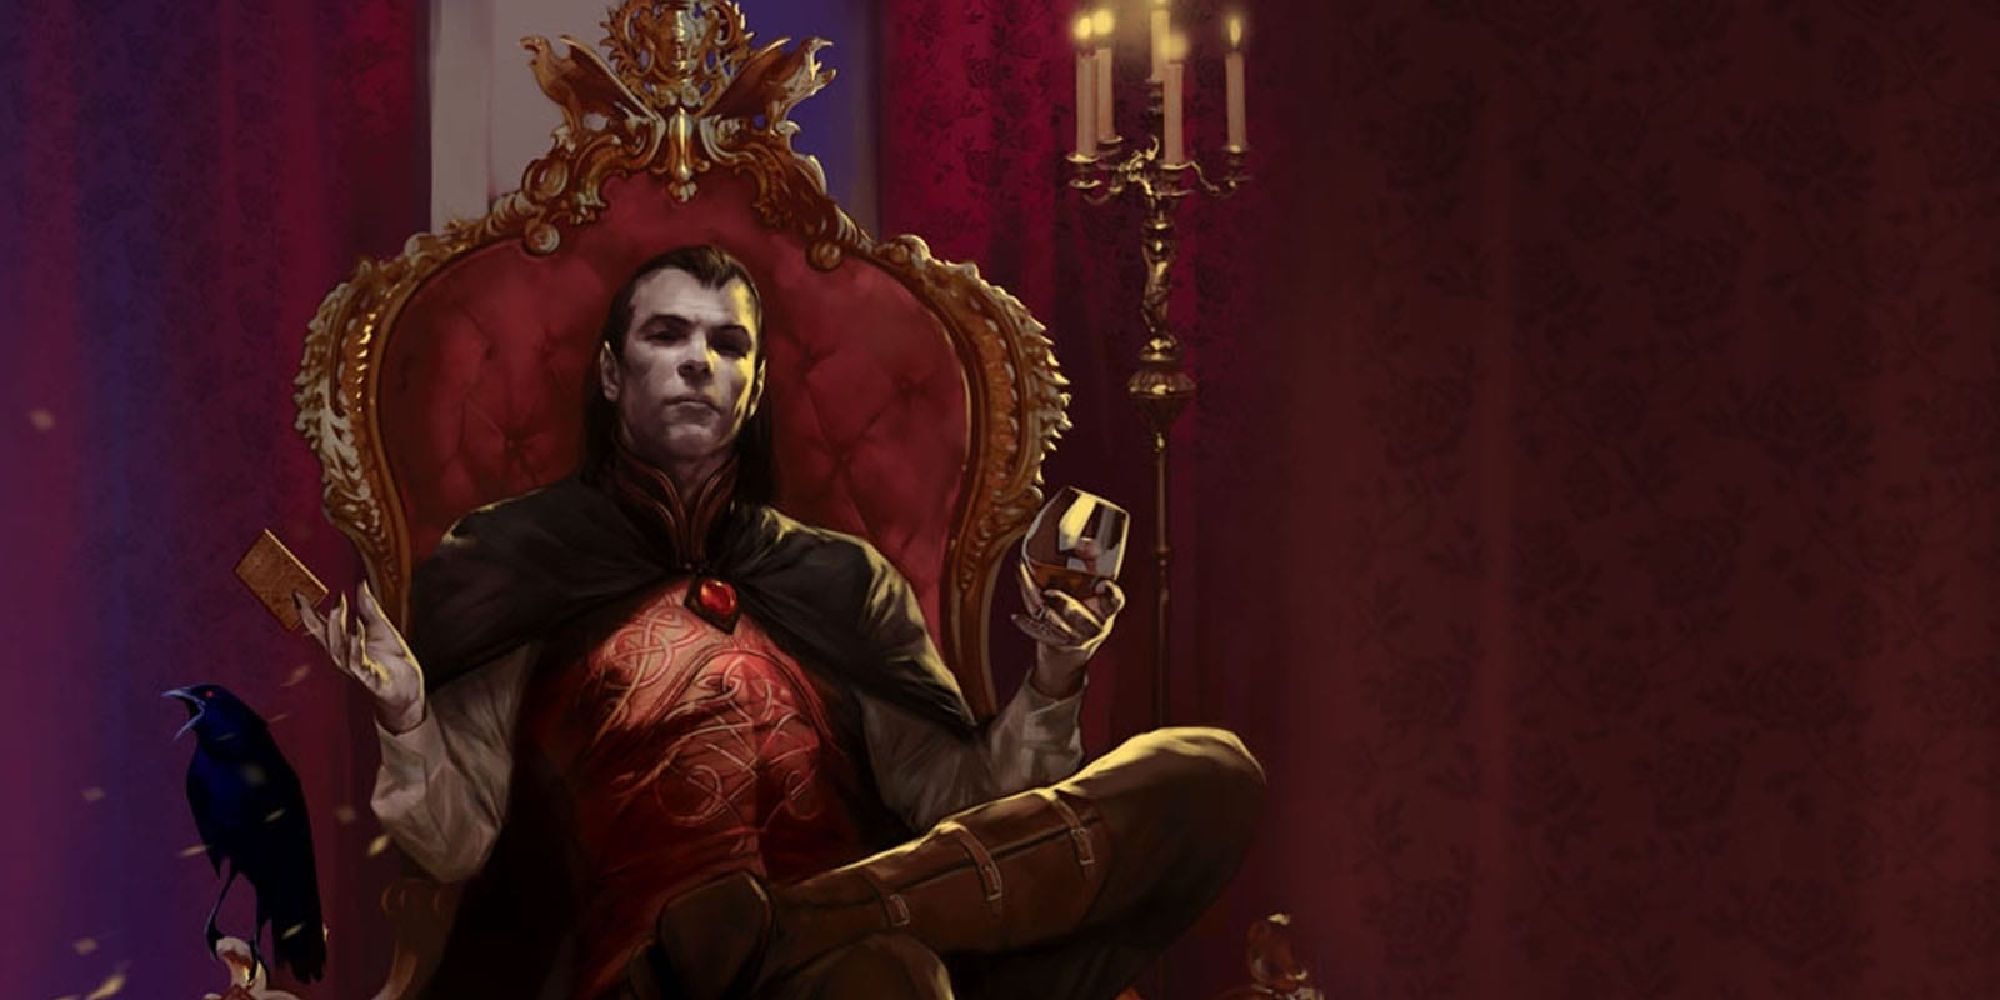 Dreadlord Strahd sat on his throne, a tarot card in one hand and a glass that could be wine in the other. 